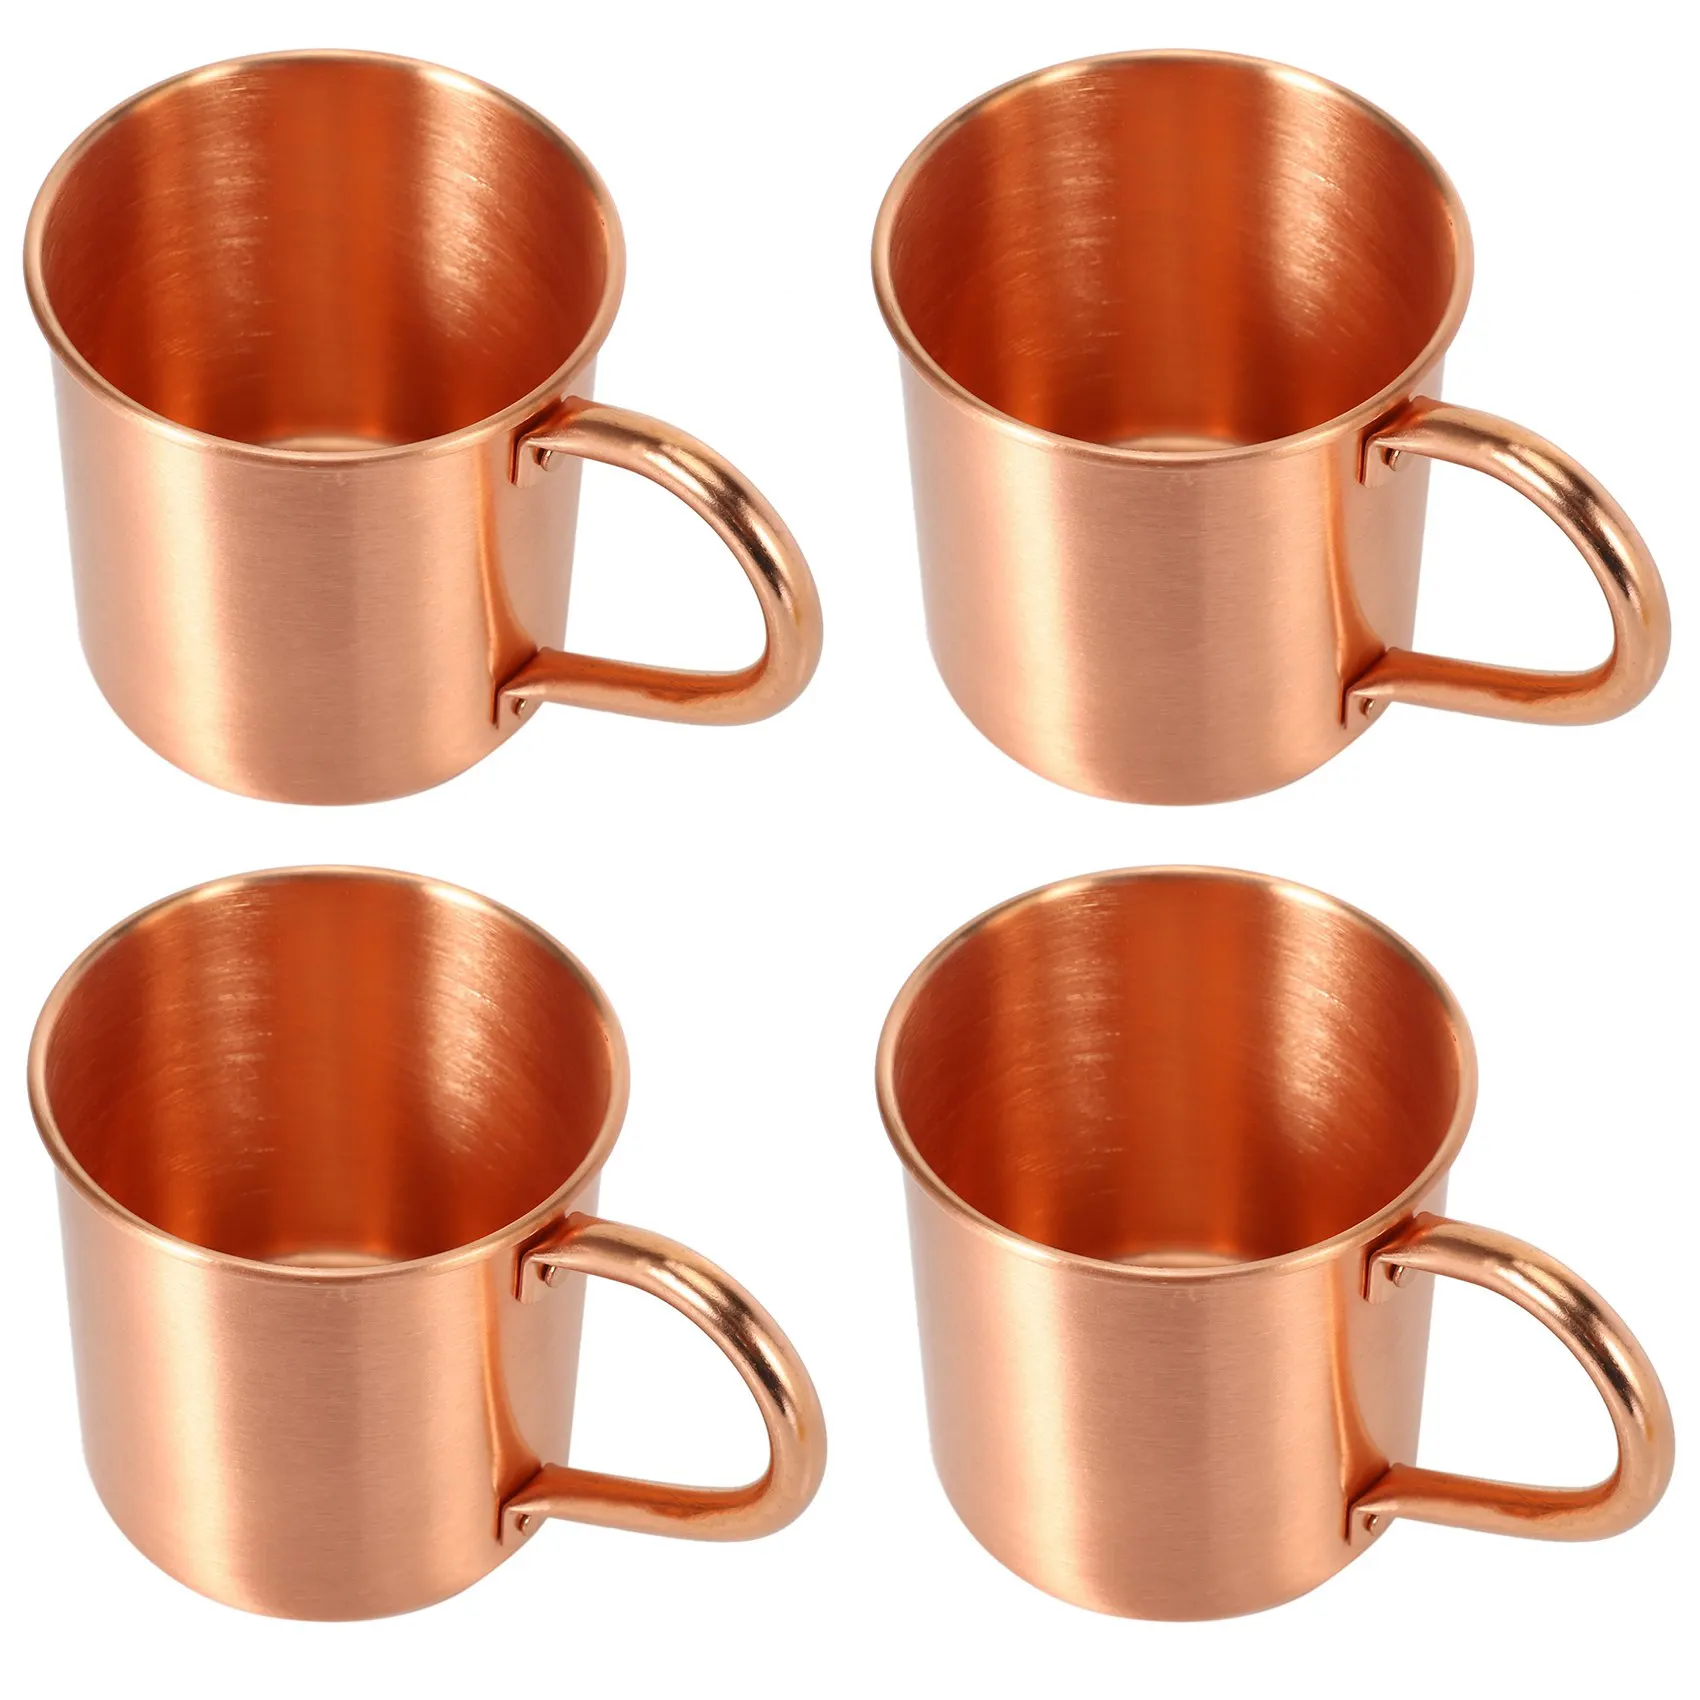 

4X Pure Copper Moscow Mule Mug Solid Smooth Without Inside Liner for Cocktail Coffee Beer Milk Water Cup Home Drinkware